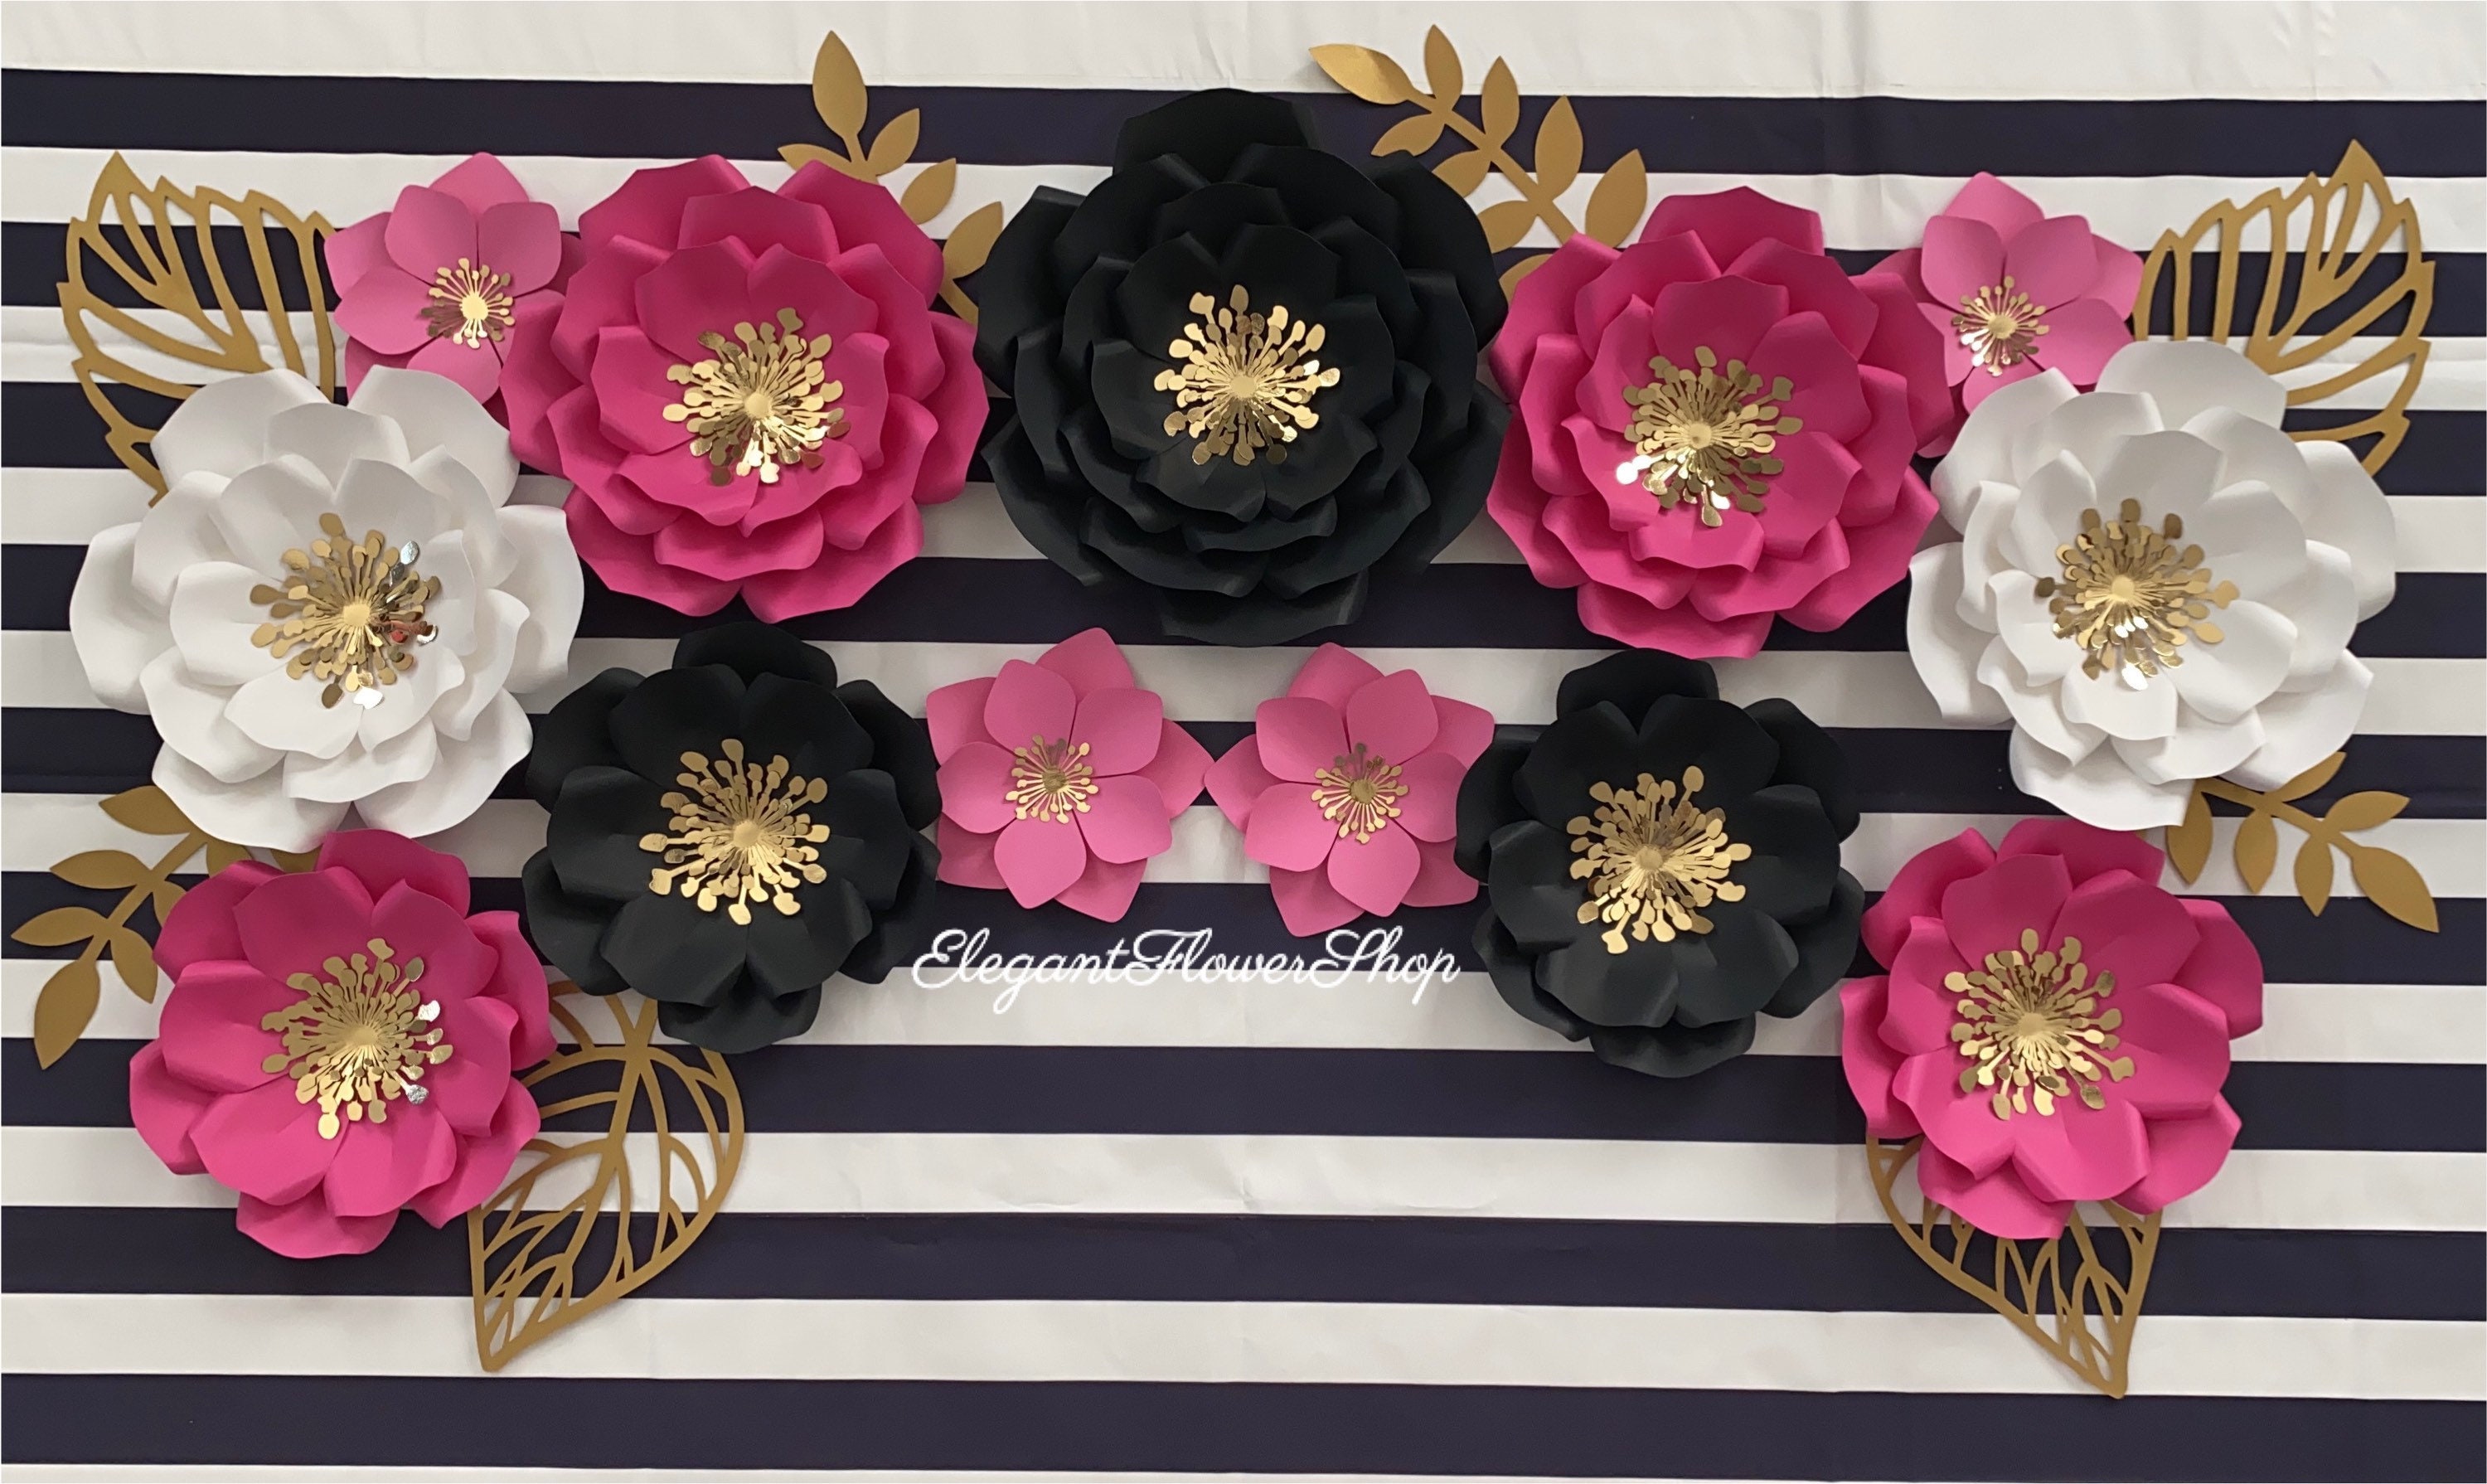 Kate Spade Party - Etsy